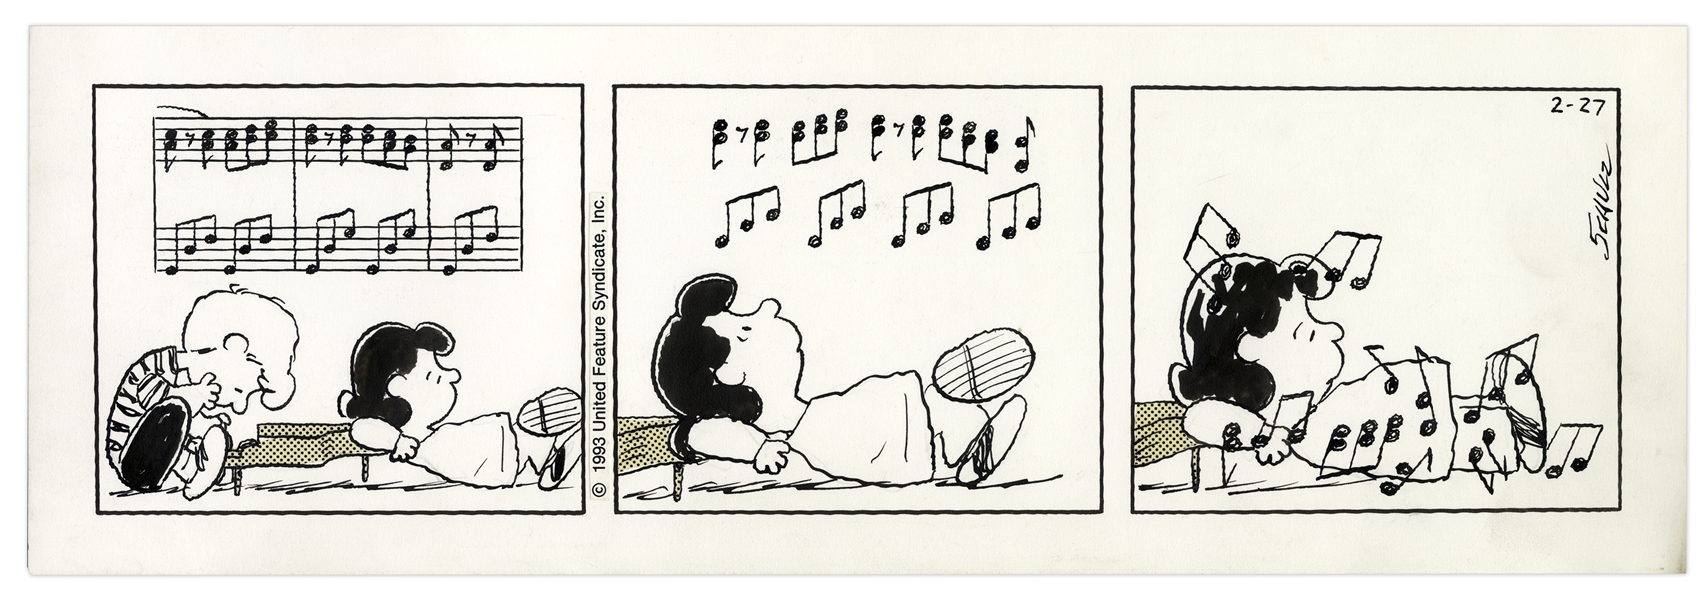 Charles Schulz Hand-Drawn ''Peanuts'' Strip From 1993 Featuring Lucy & Schroeder at His Piano